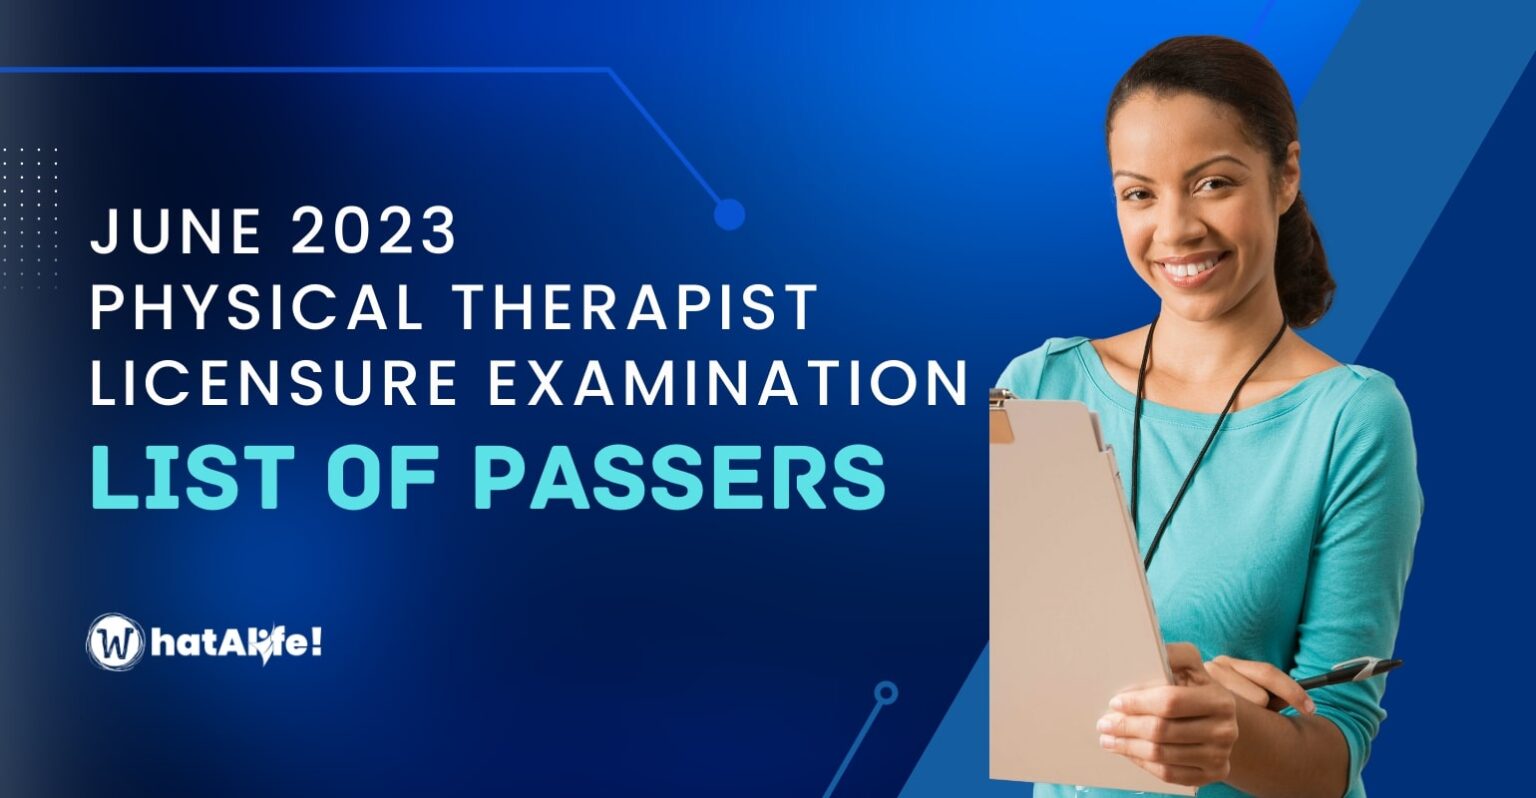 June 2023 Physical Therapist Exam Results WhatALIfe!